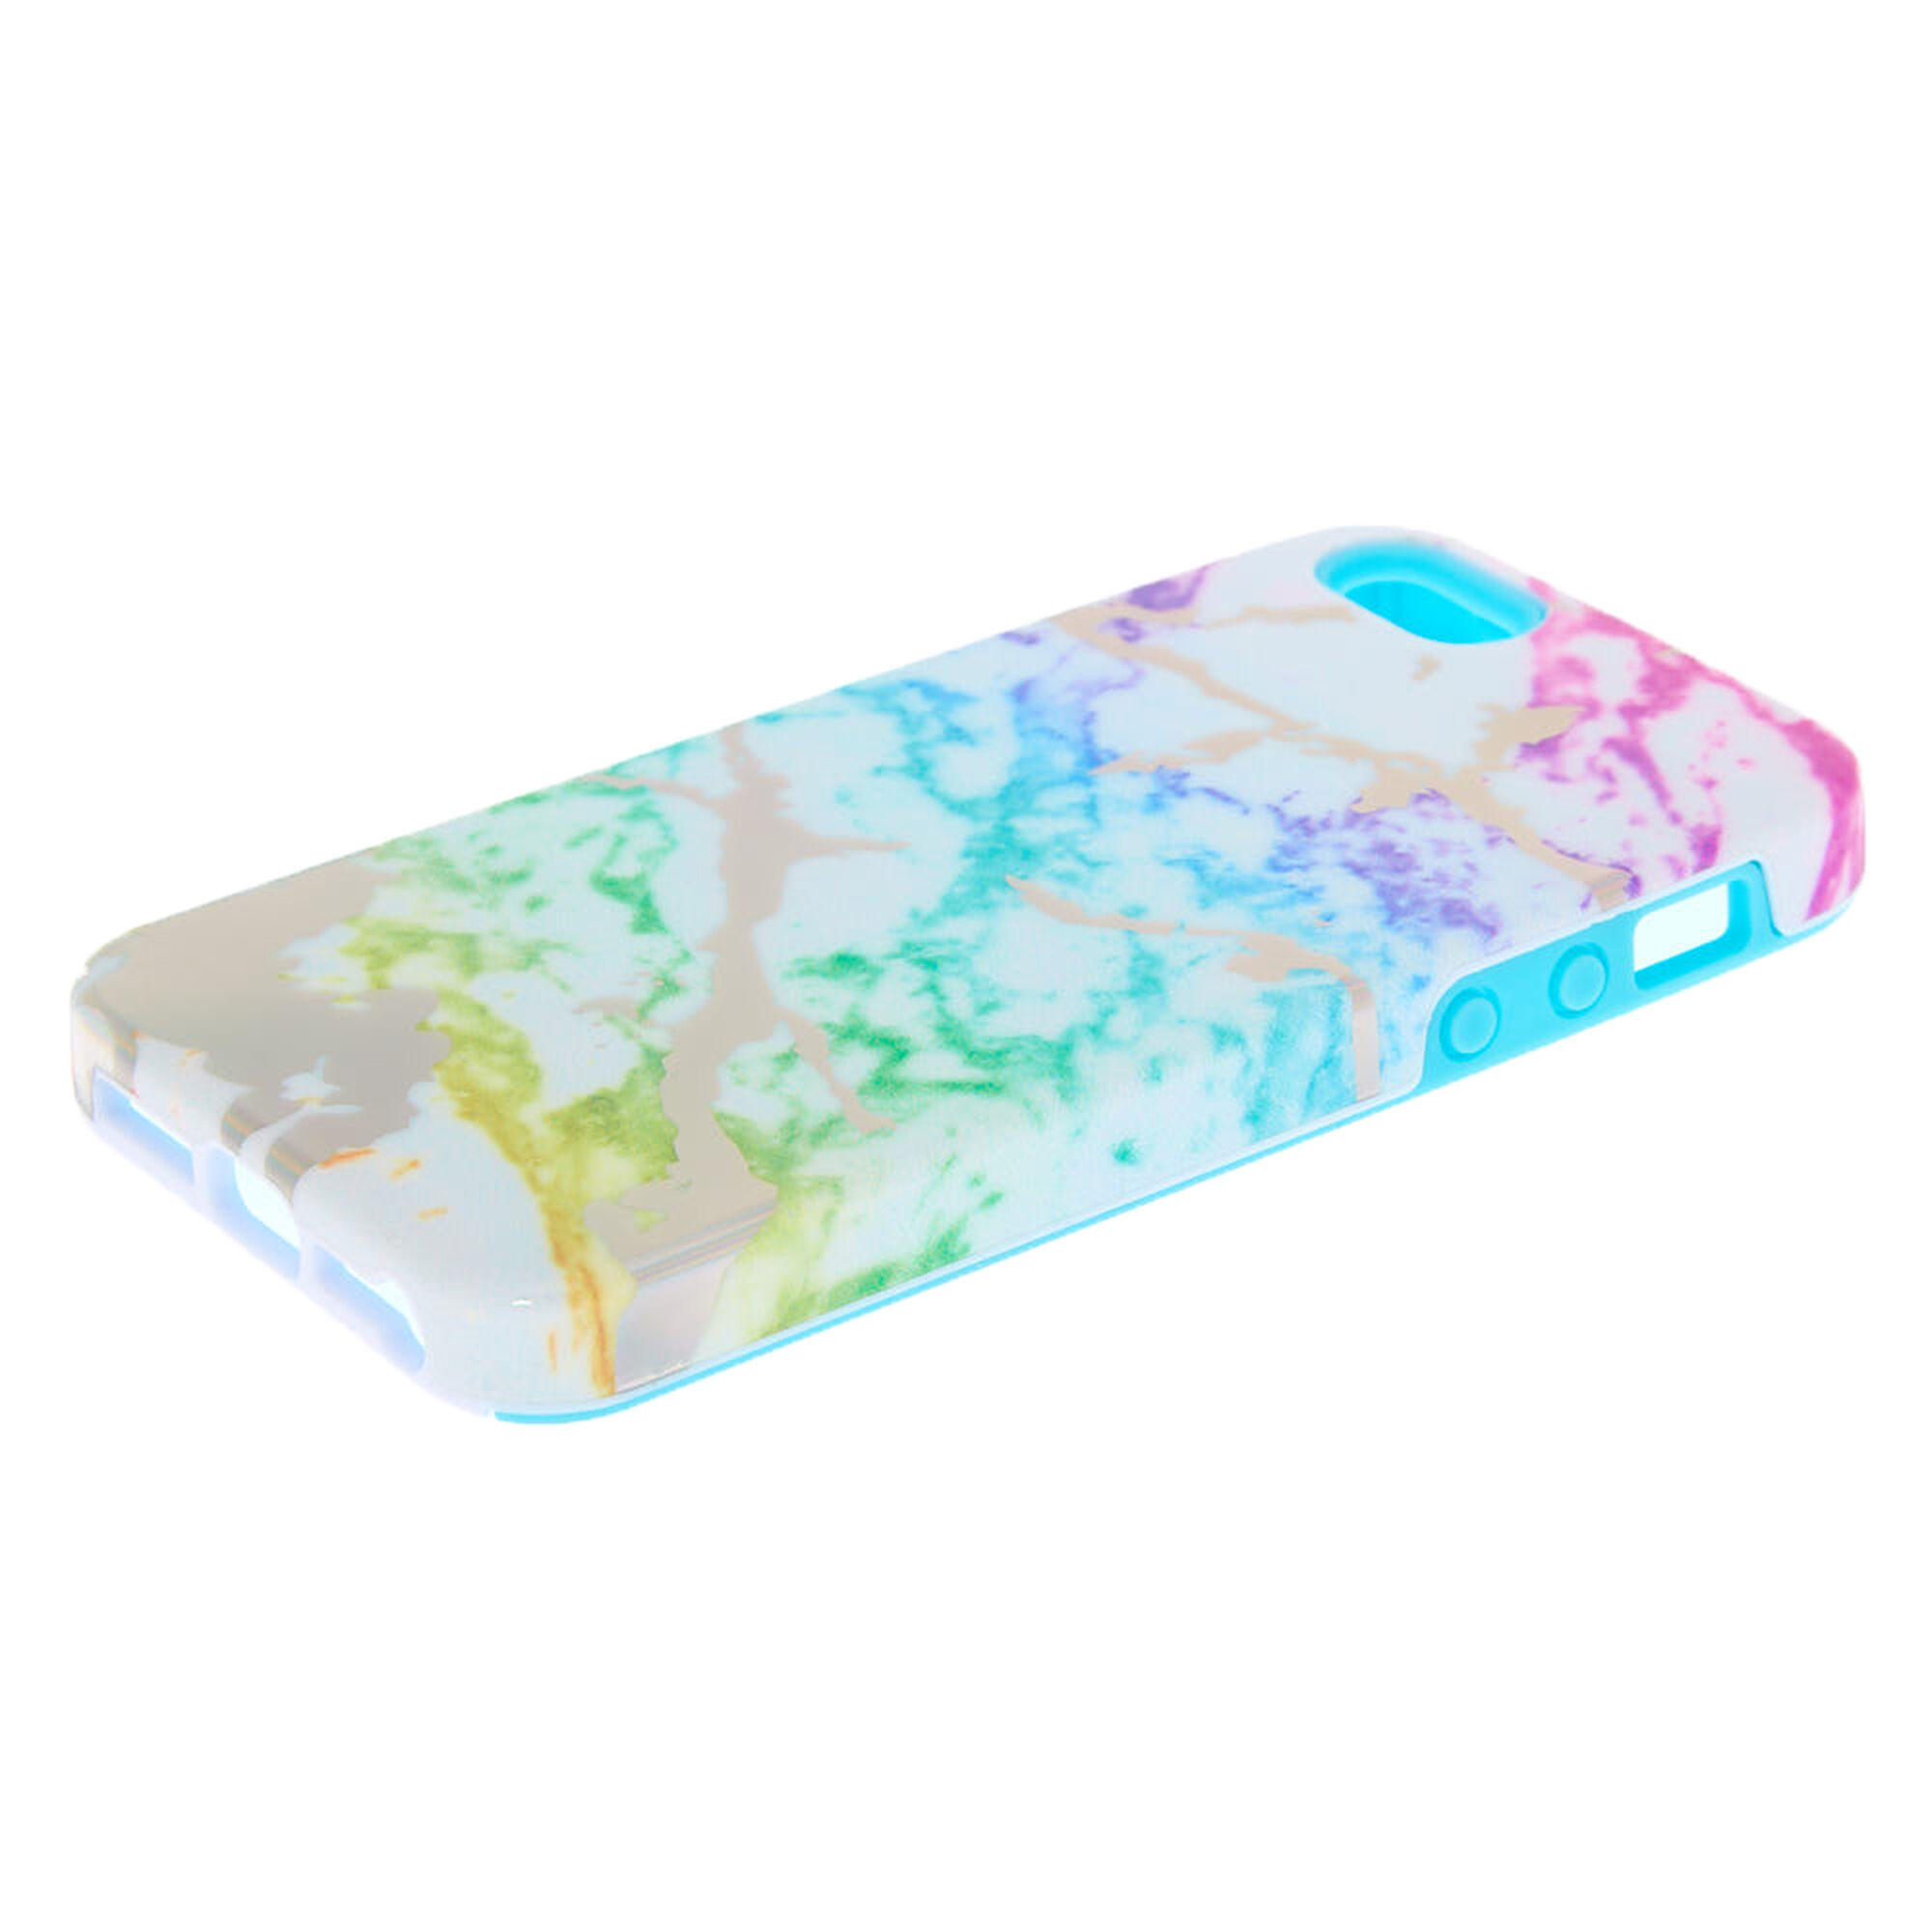 Rainbow Marble Protective Phone Case - Fits iPhone 5/5S/SE | Claire's US